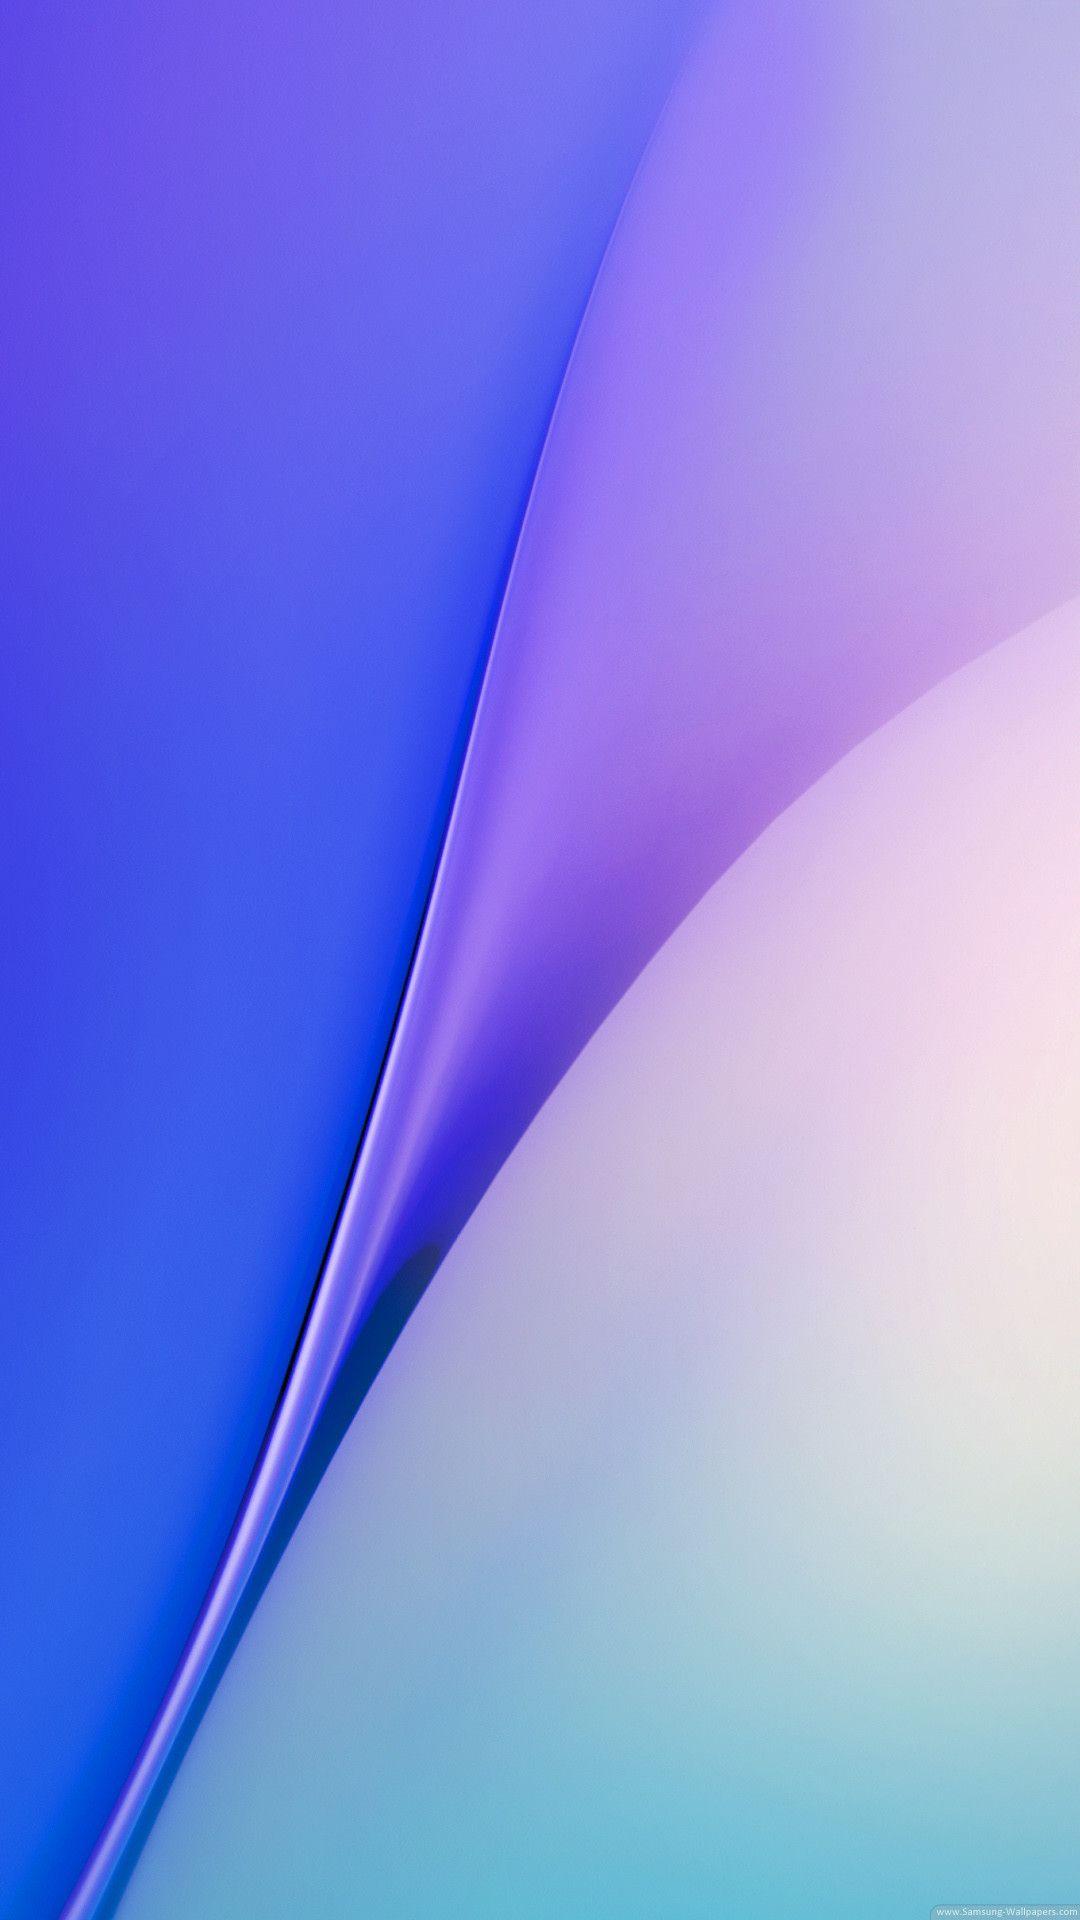 Galaxy S6 Samsung Wallpaper Hd 1080P Download : Are you ready to get